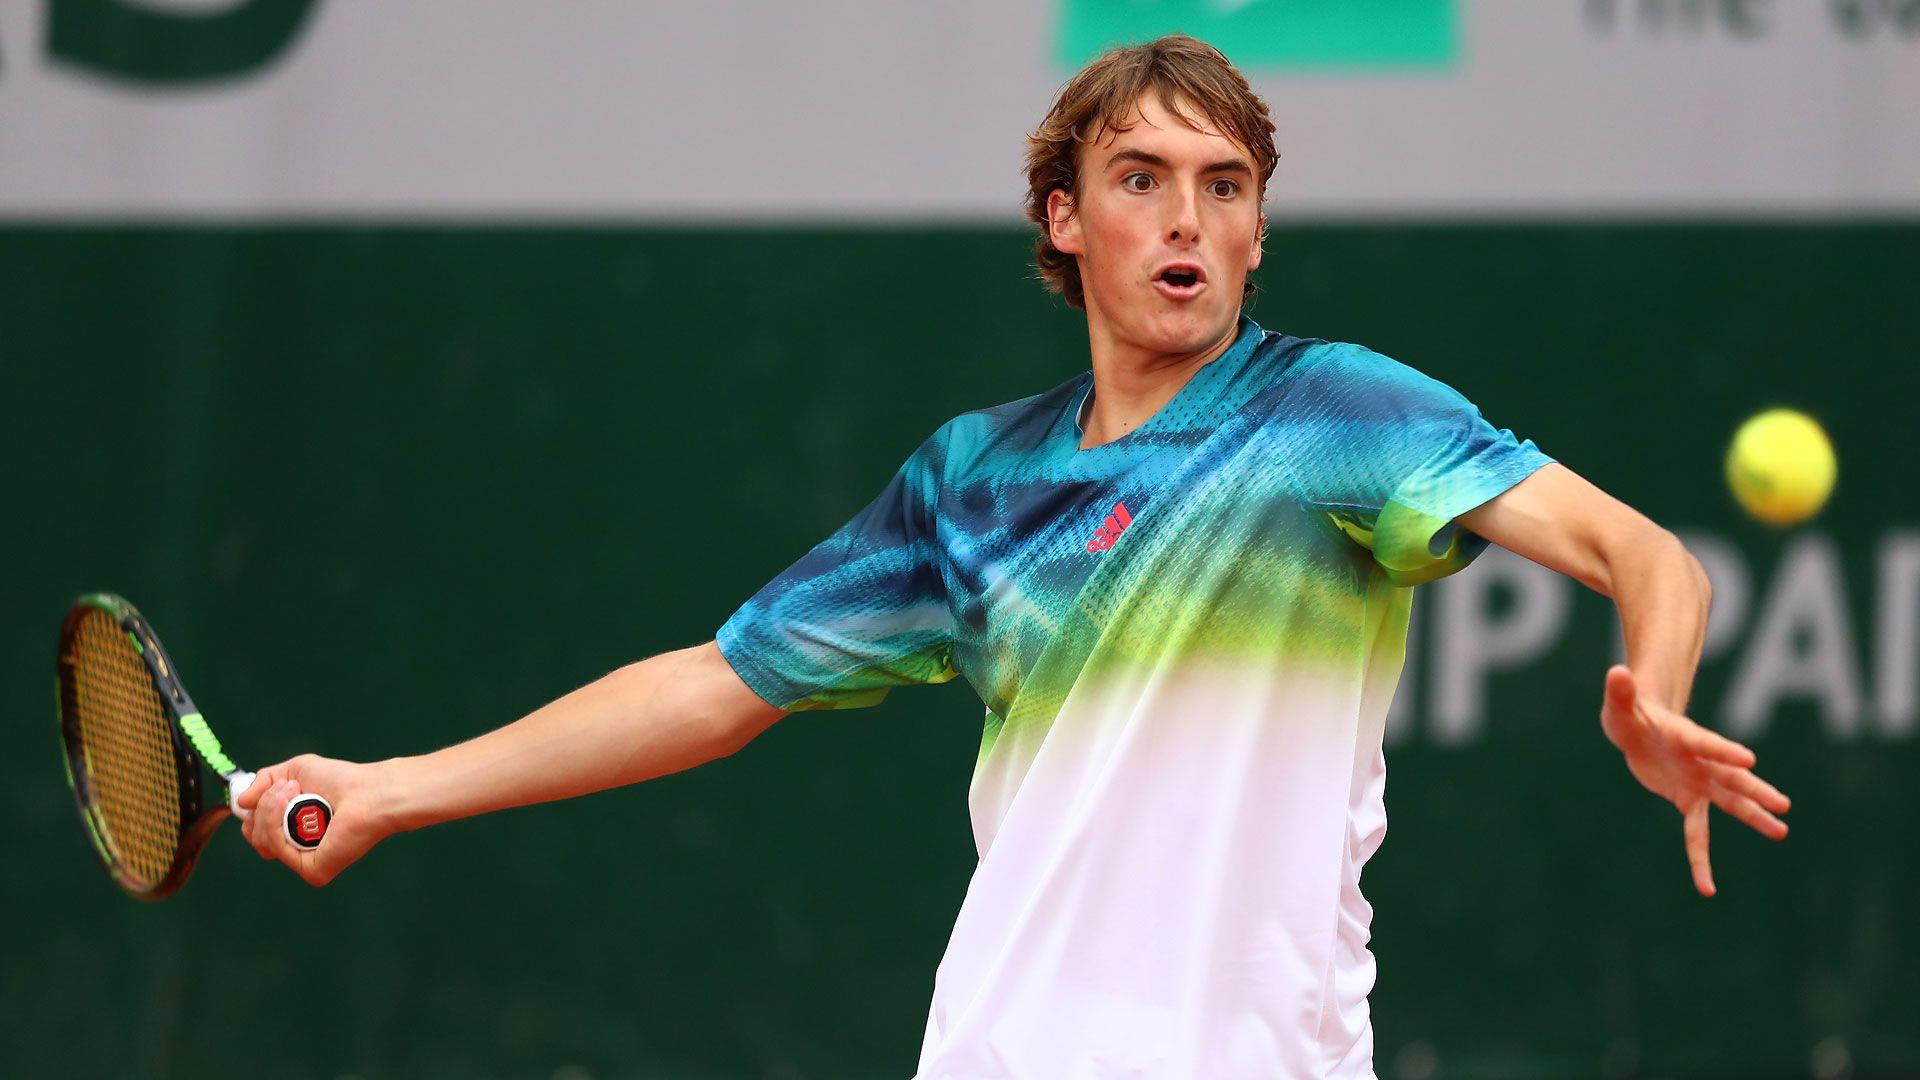 Young Stefanos Tsitsipas With Short Hair Background